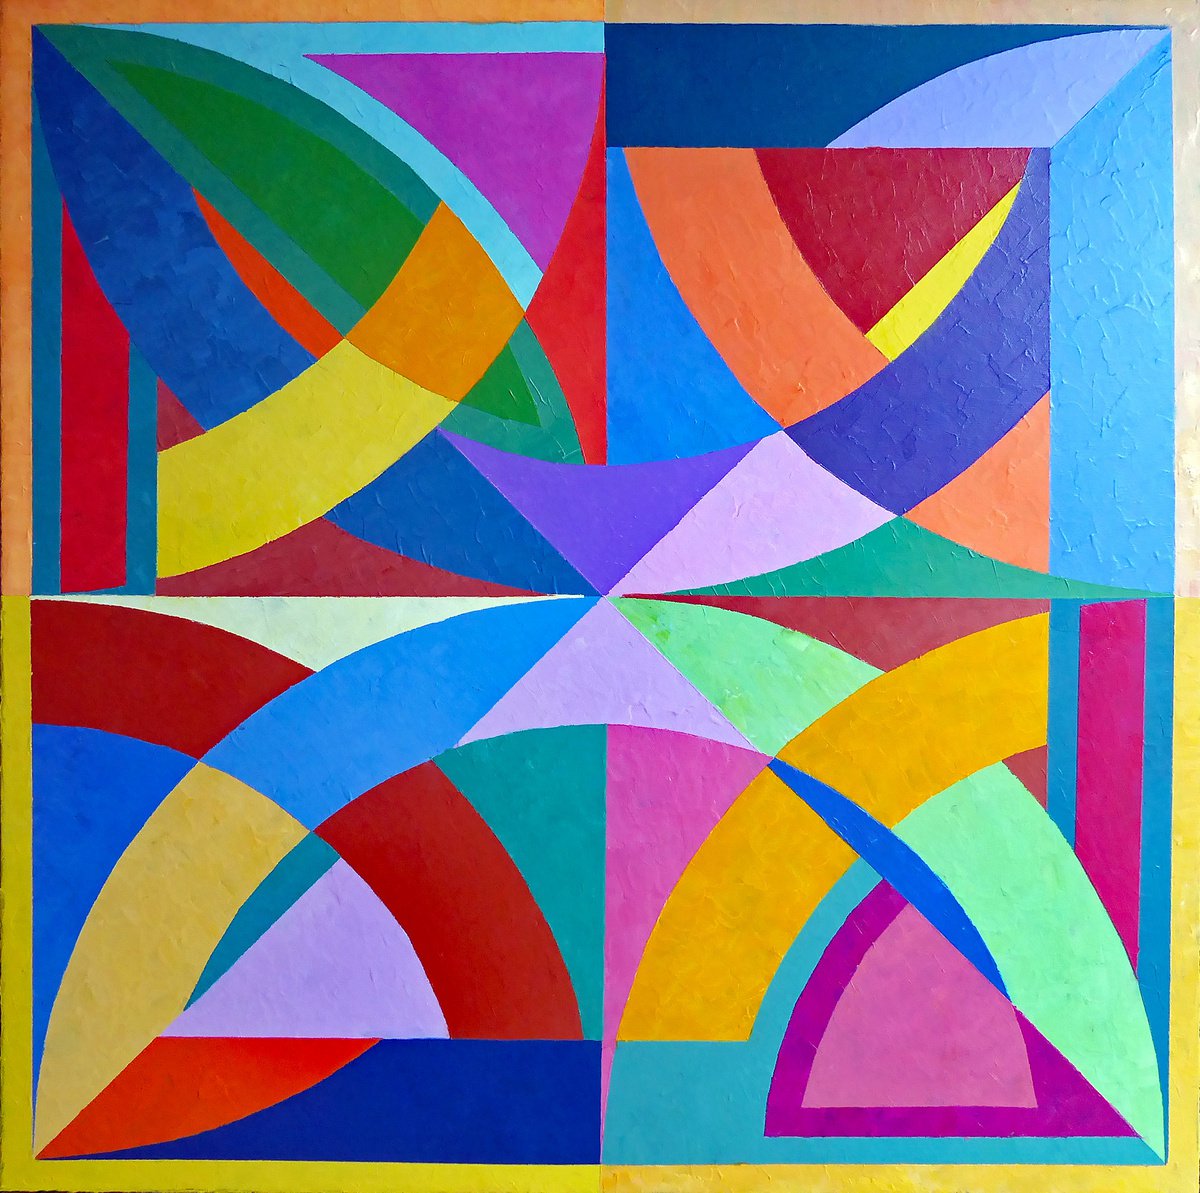 A COMPOSITION OF SHAPES by Stephen Conroy